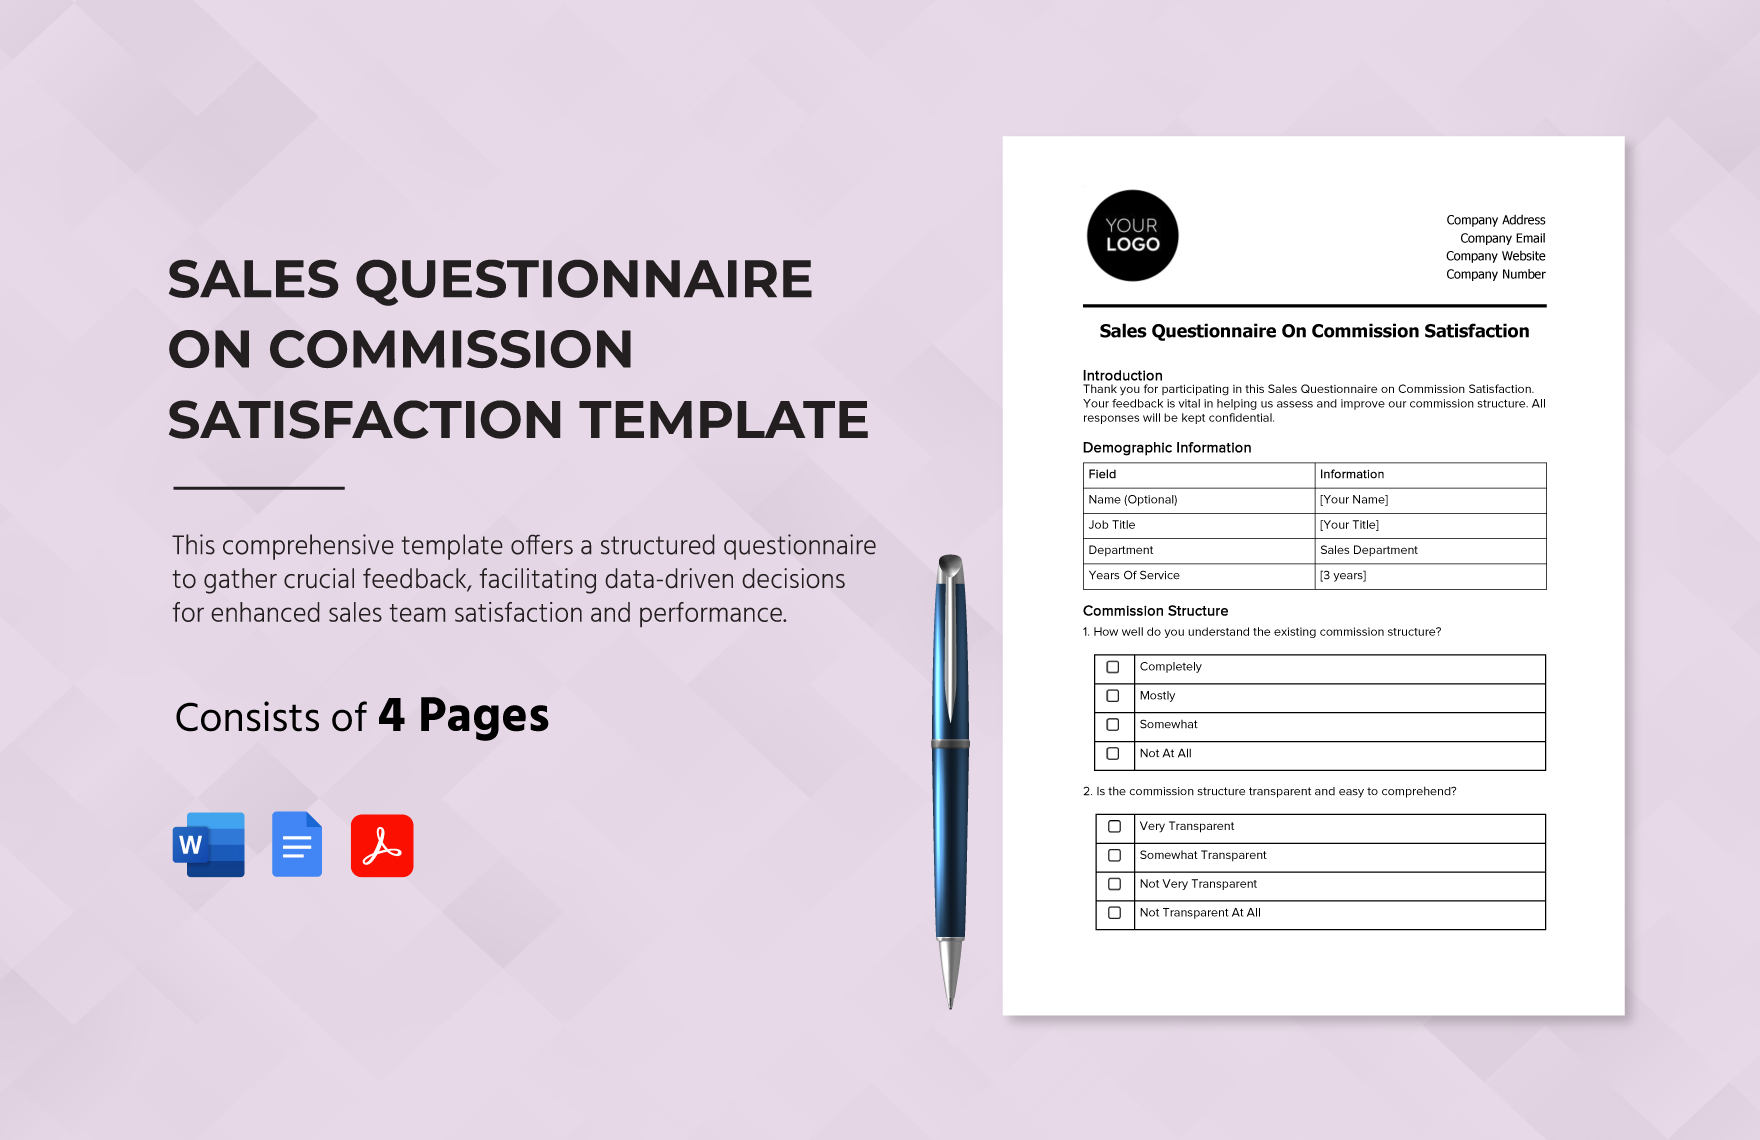 Sales Questionnaire on Commission Satisfaction Template